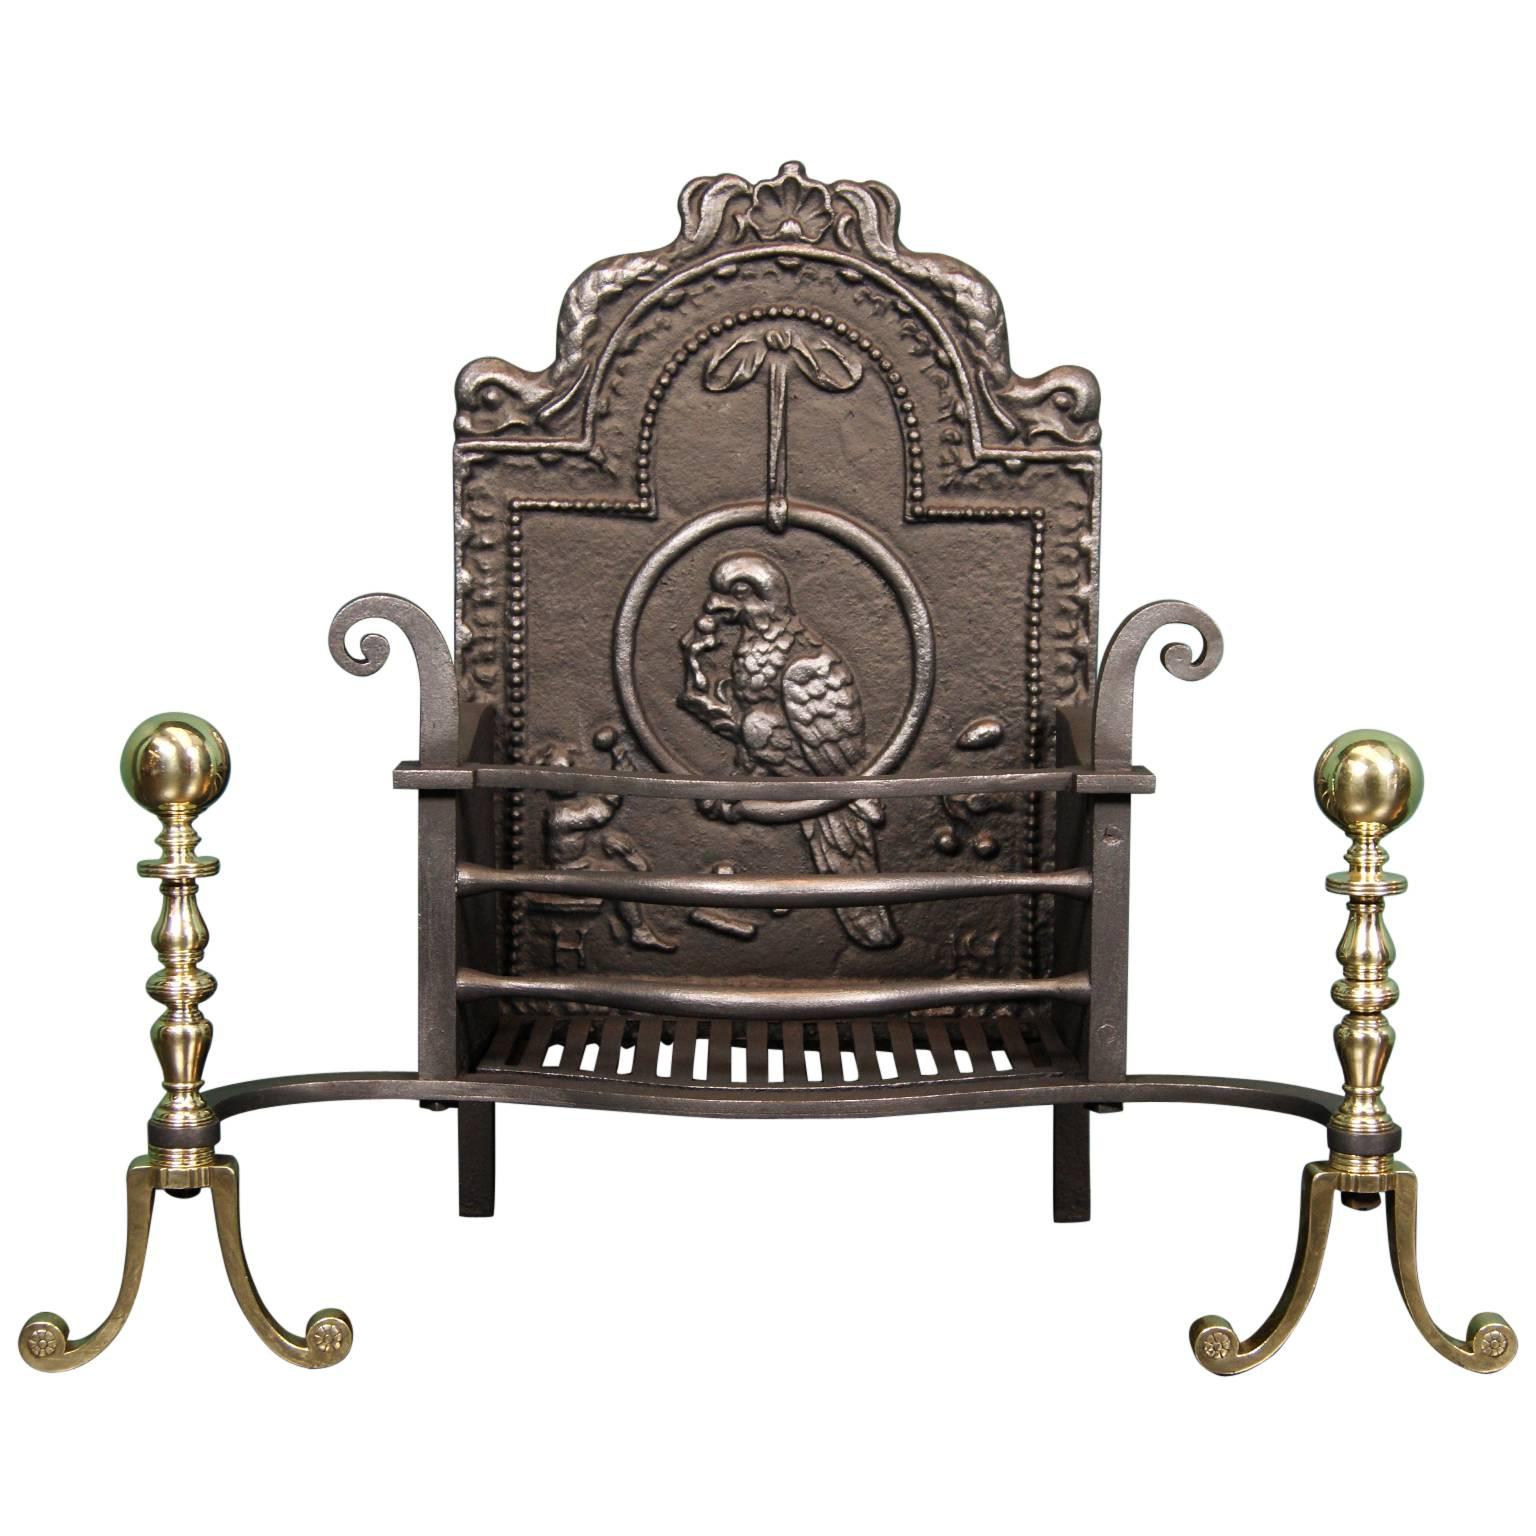 Wrought-Iron Fireplace Fire Basket with Brass Standards